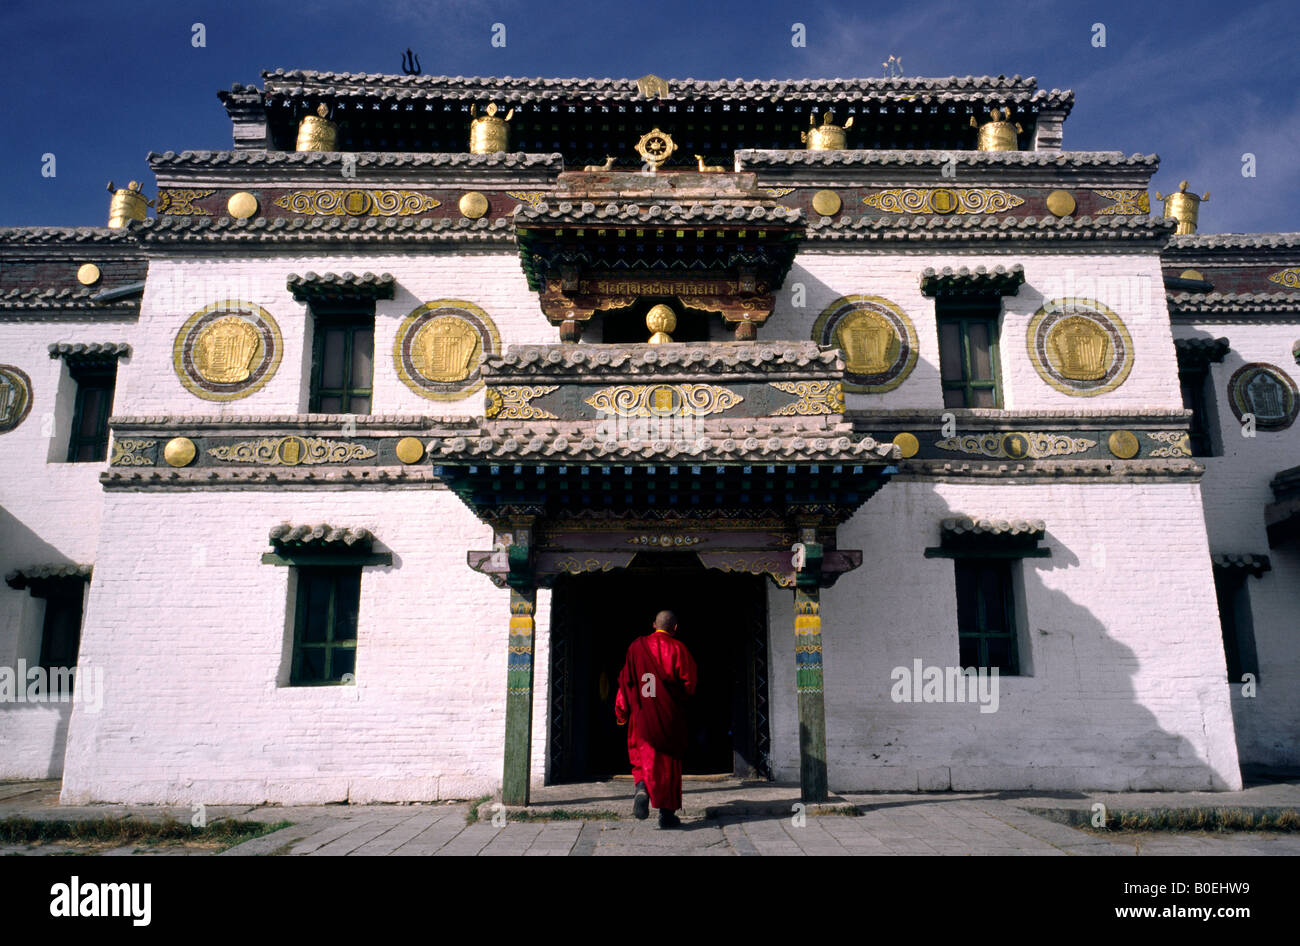 Oct 12, 2006 - Monk on his way to education at Erdene Zuu monastery in the Mongolian town of Kharkhorin. Stock Photo